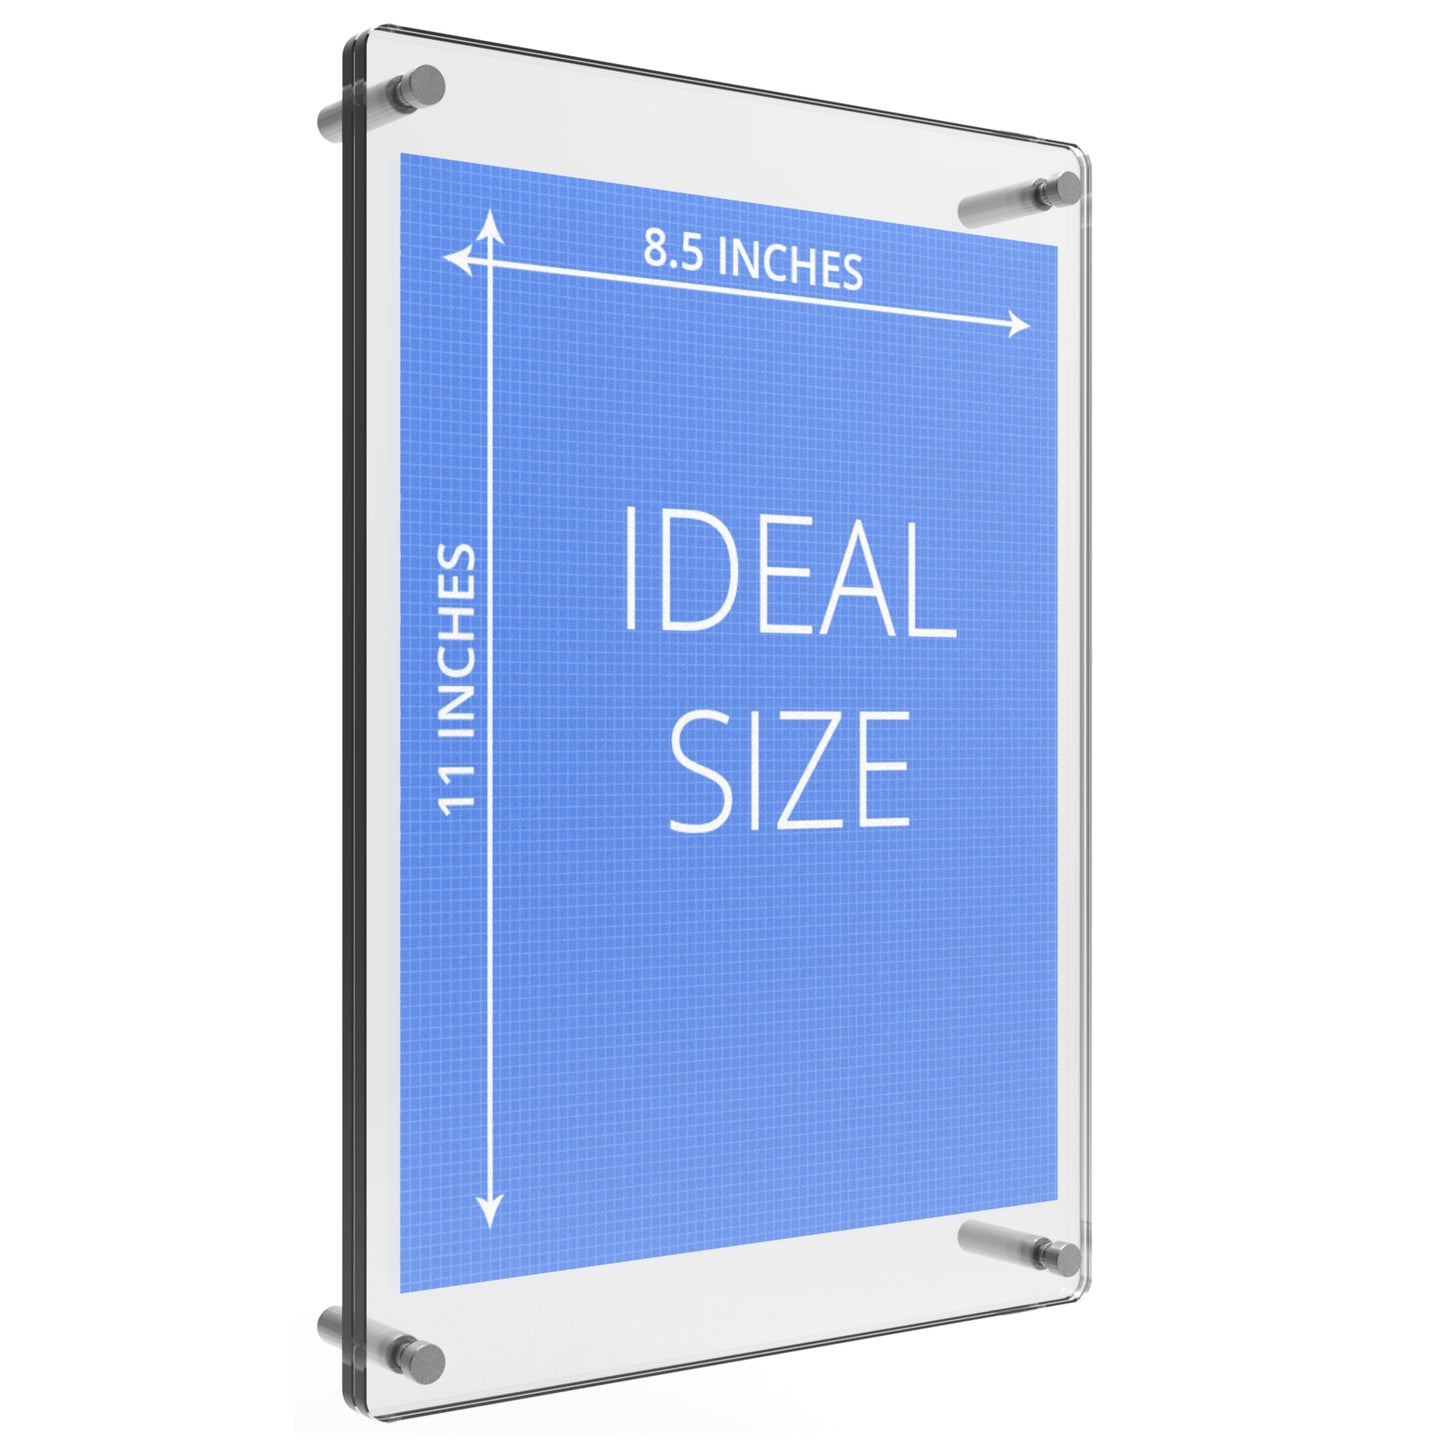 Floating Wall Mount Display Frame for Letter Size Documents